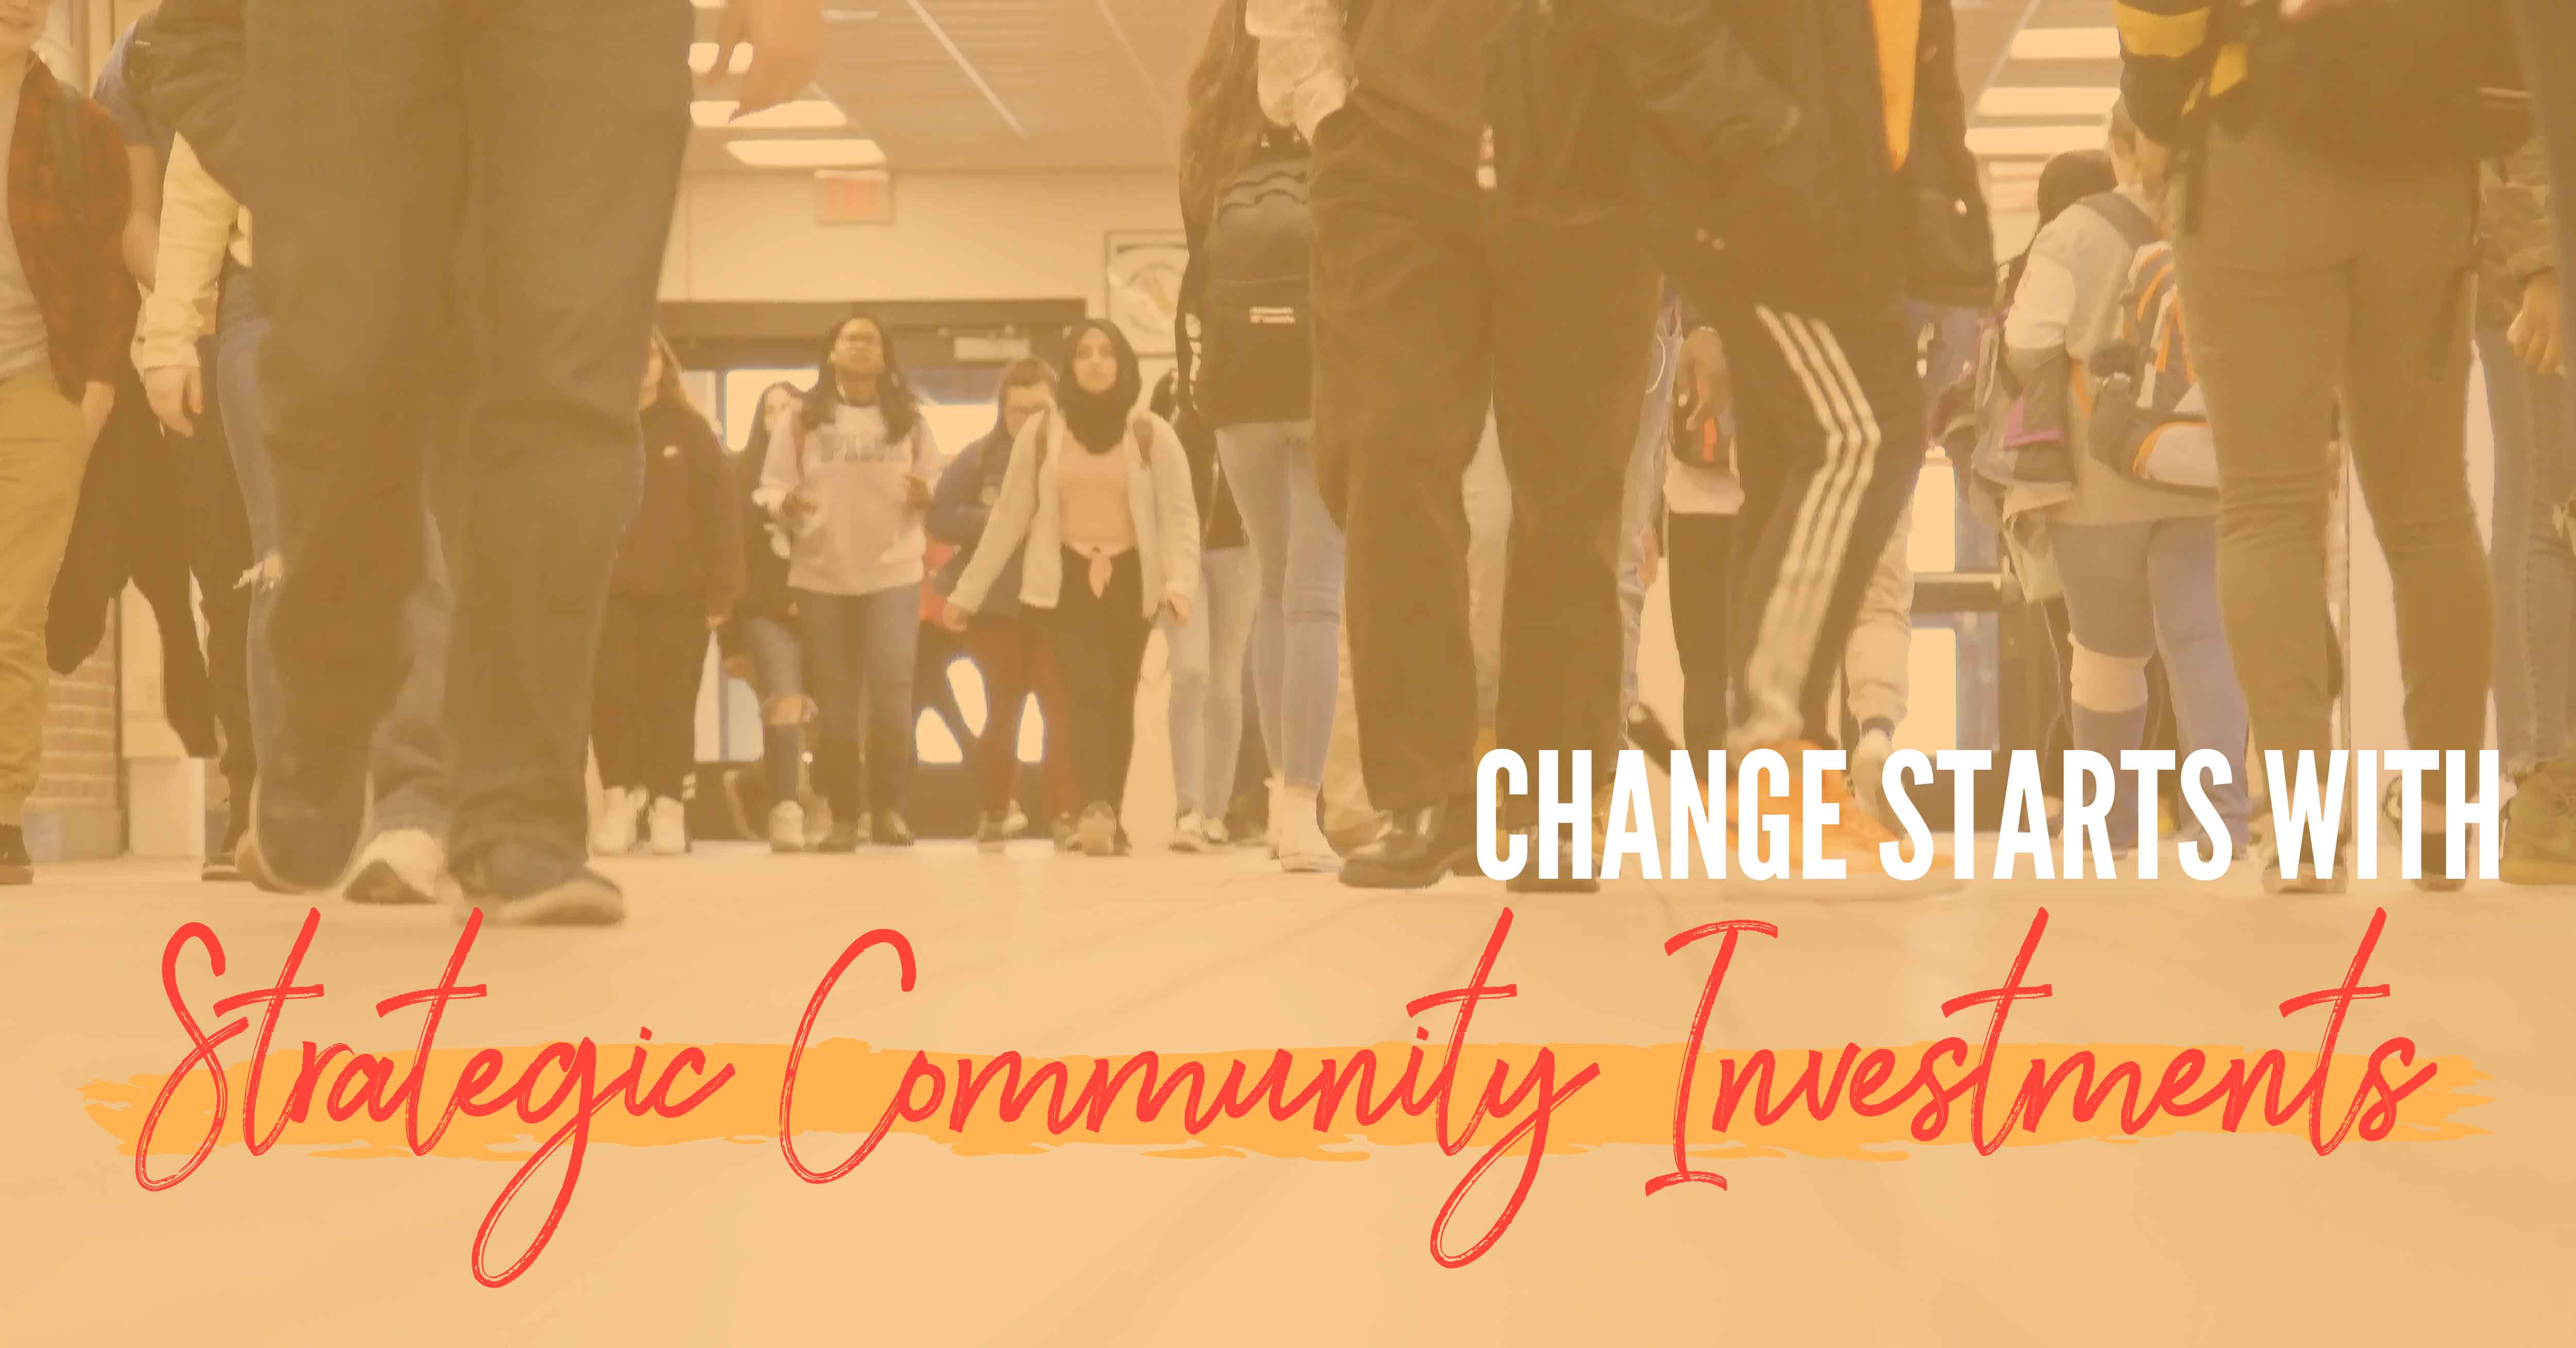 Picture highschool students walking in a hallway with yellow overlay and the words "change starts with strategic community investments"